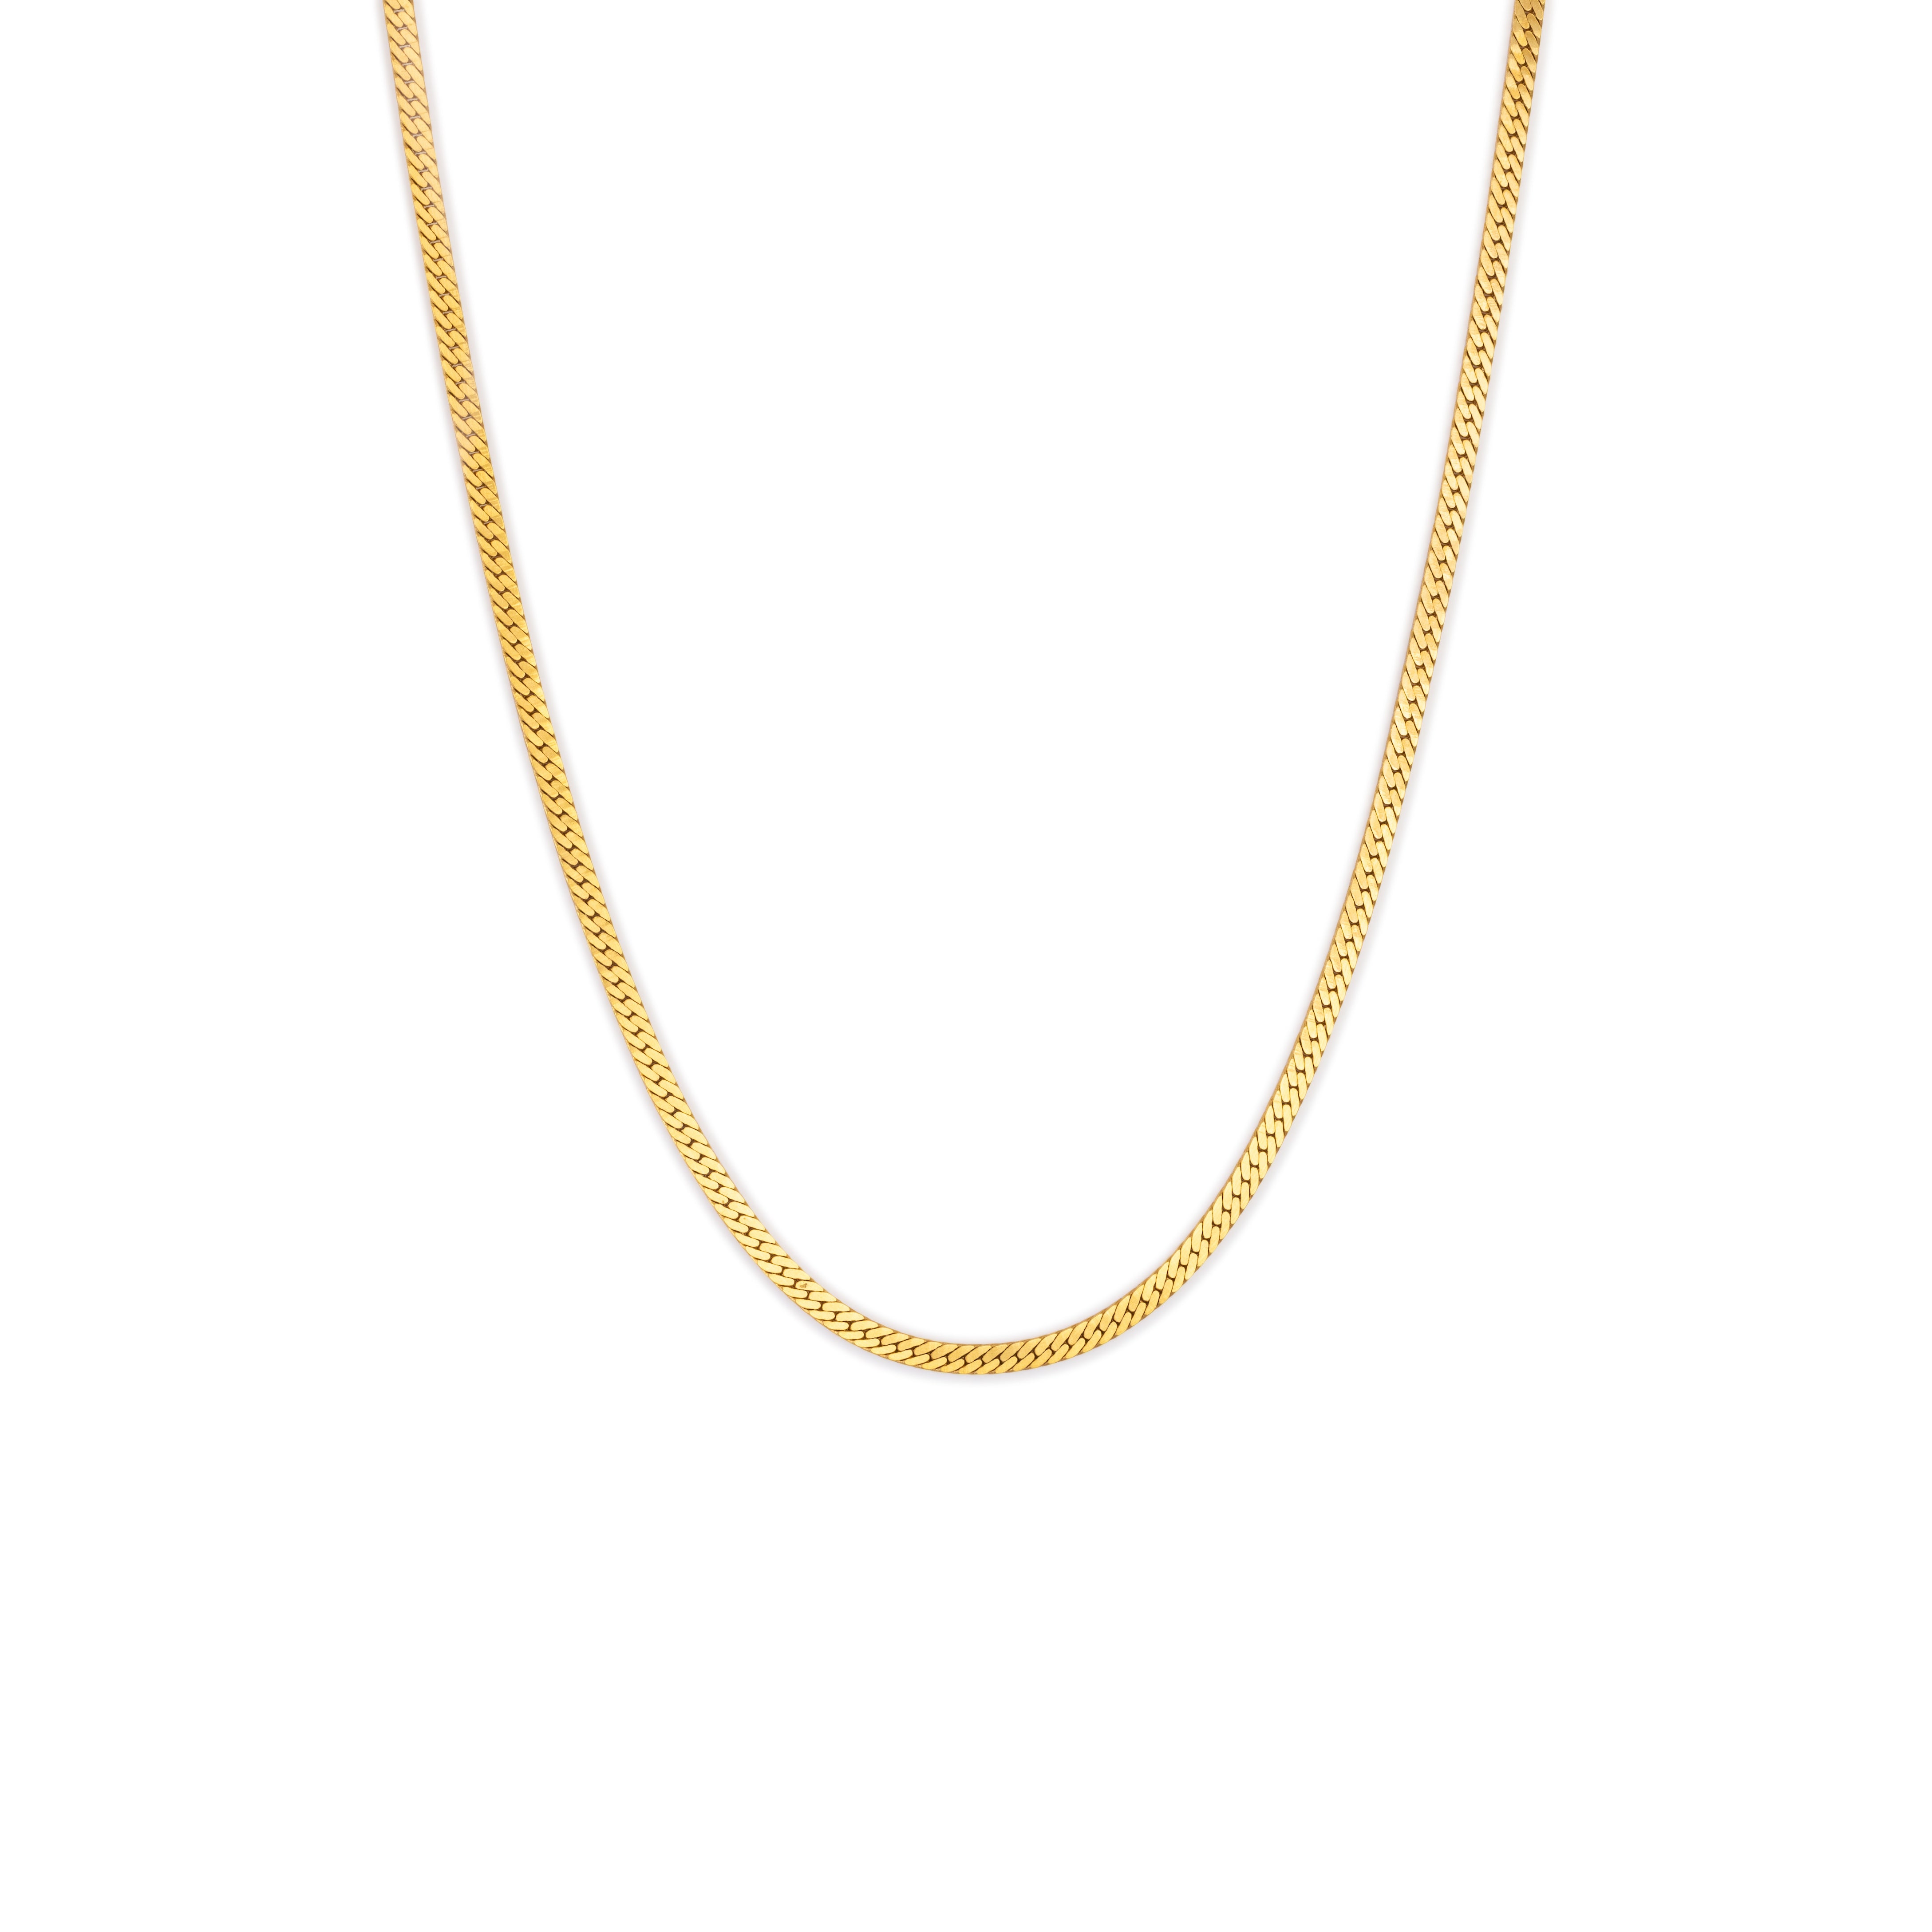 Gold plated flat snake chain